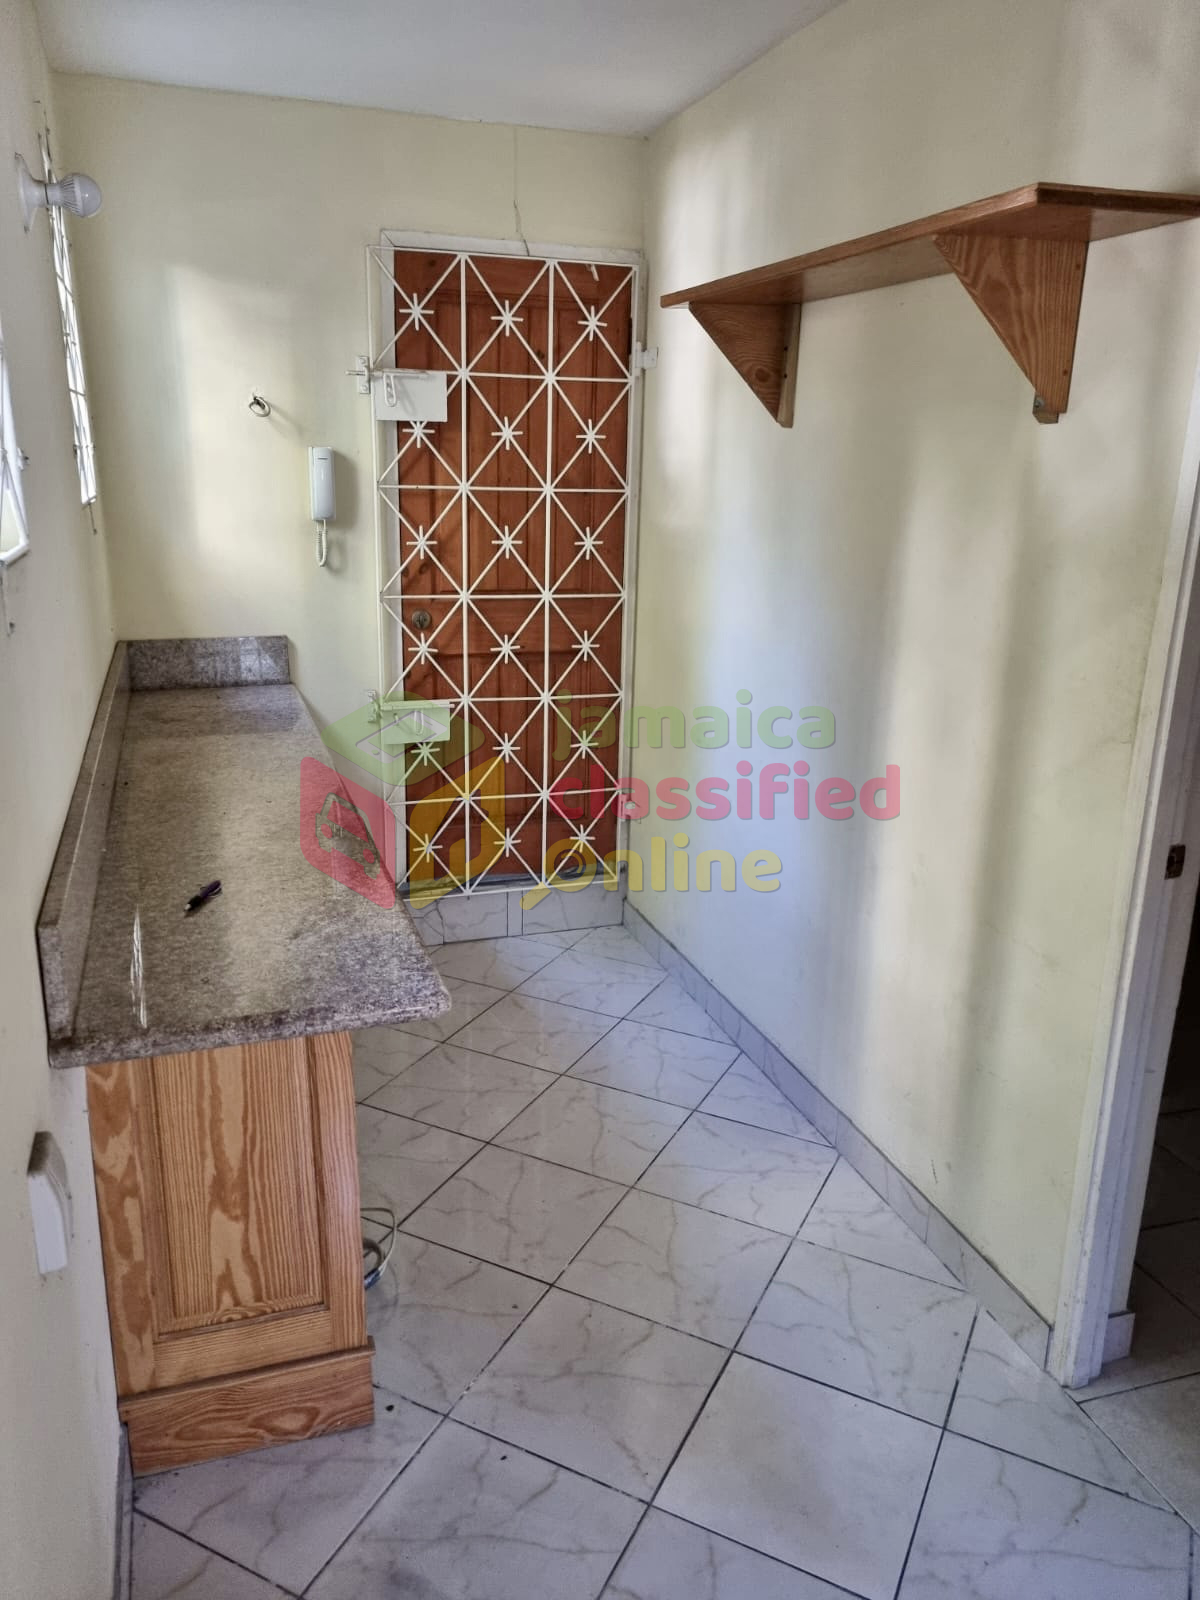 Unfurnished Bedroom Bath Apt In Mona For Rent In Mona Kingston St Andrew Apartments